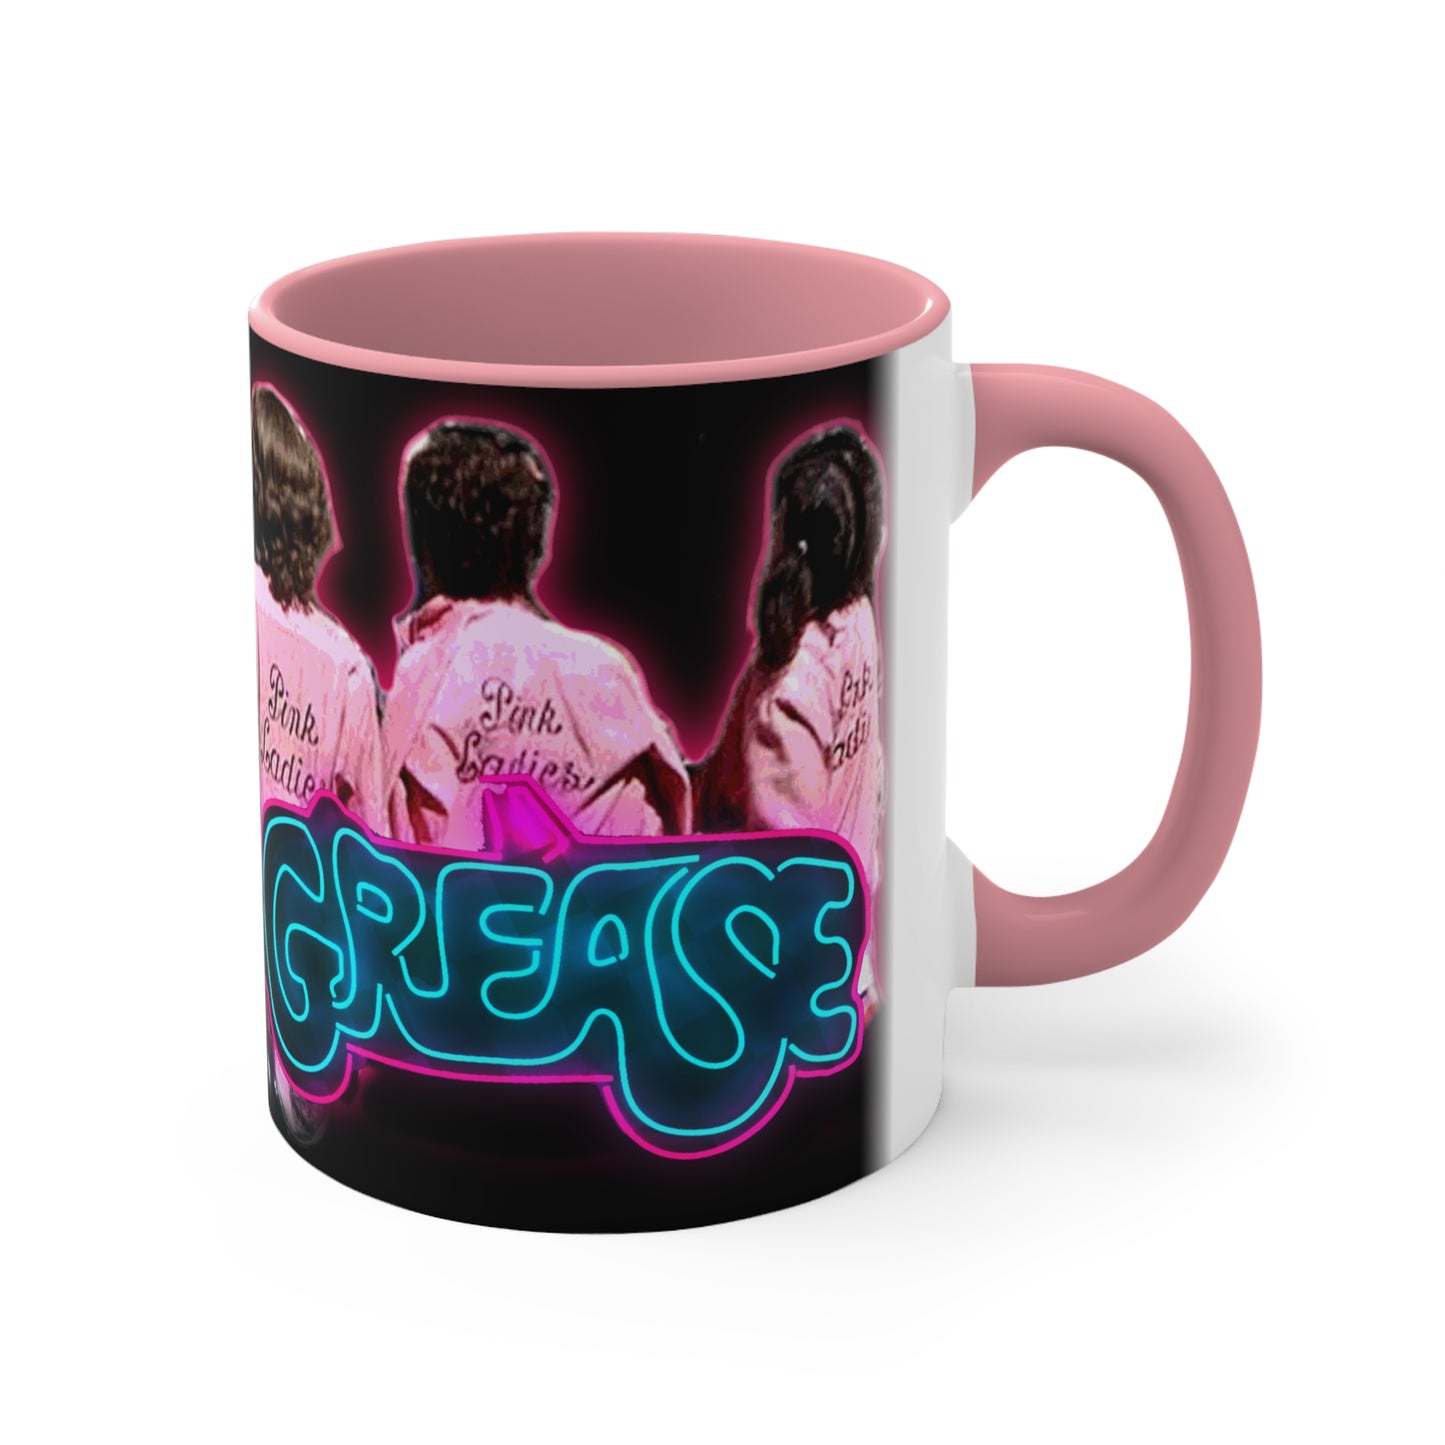 Grease Pink Ladies Neon Personalized Mug for Coffee or Tea